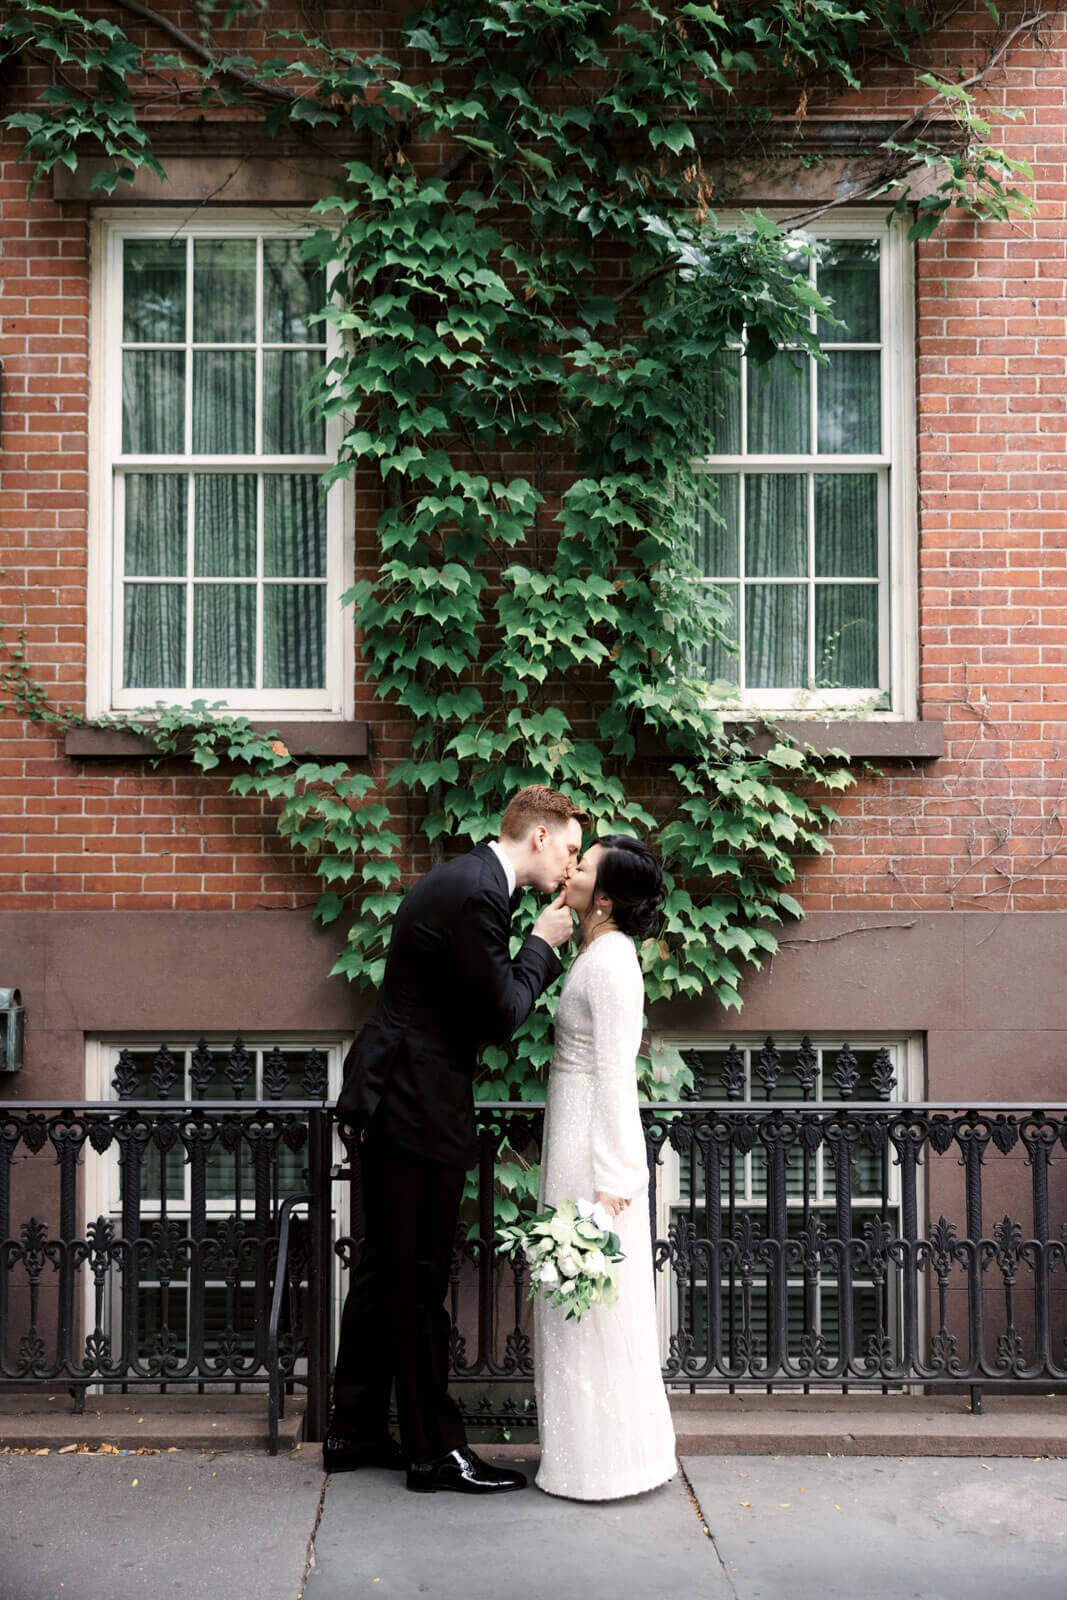 The bride and the groom are kissing on a sidewalk along the streets of West Village, NYC. Image by Jenny Fu Studio